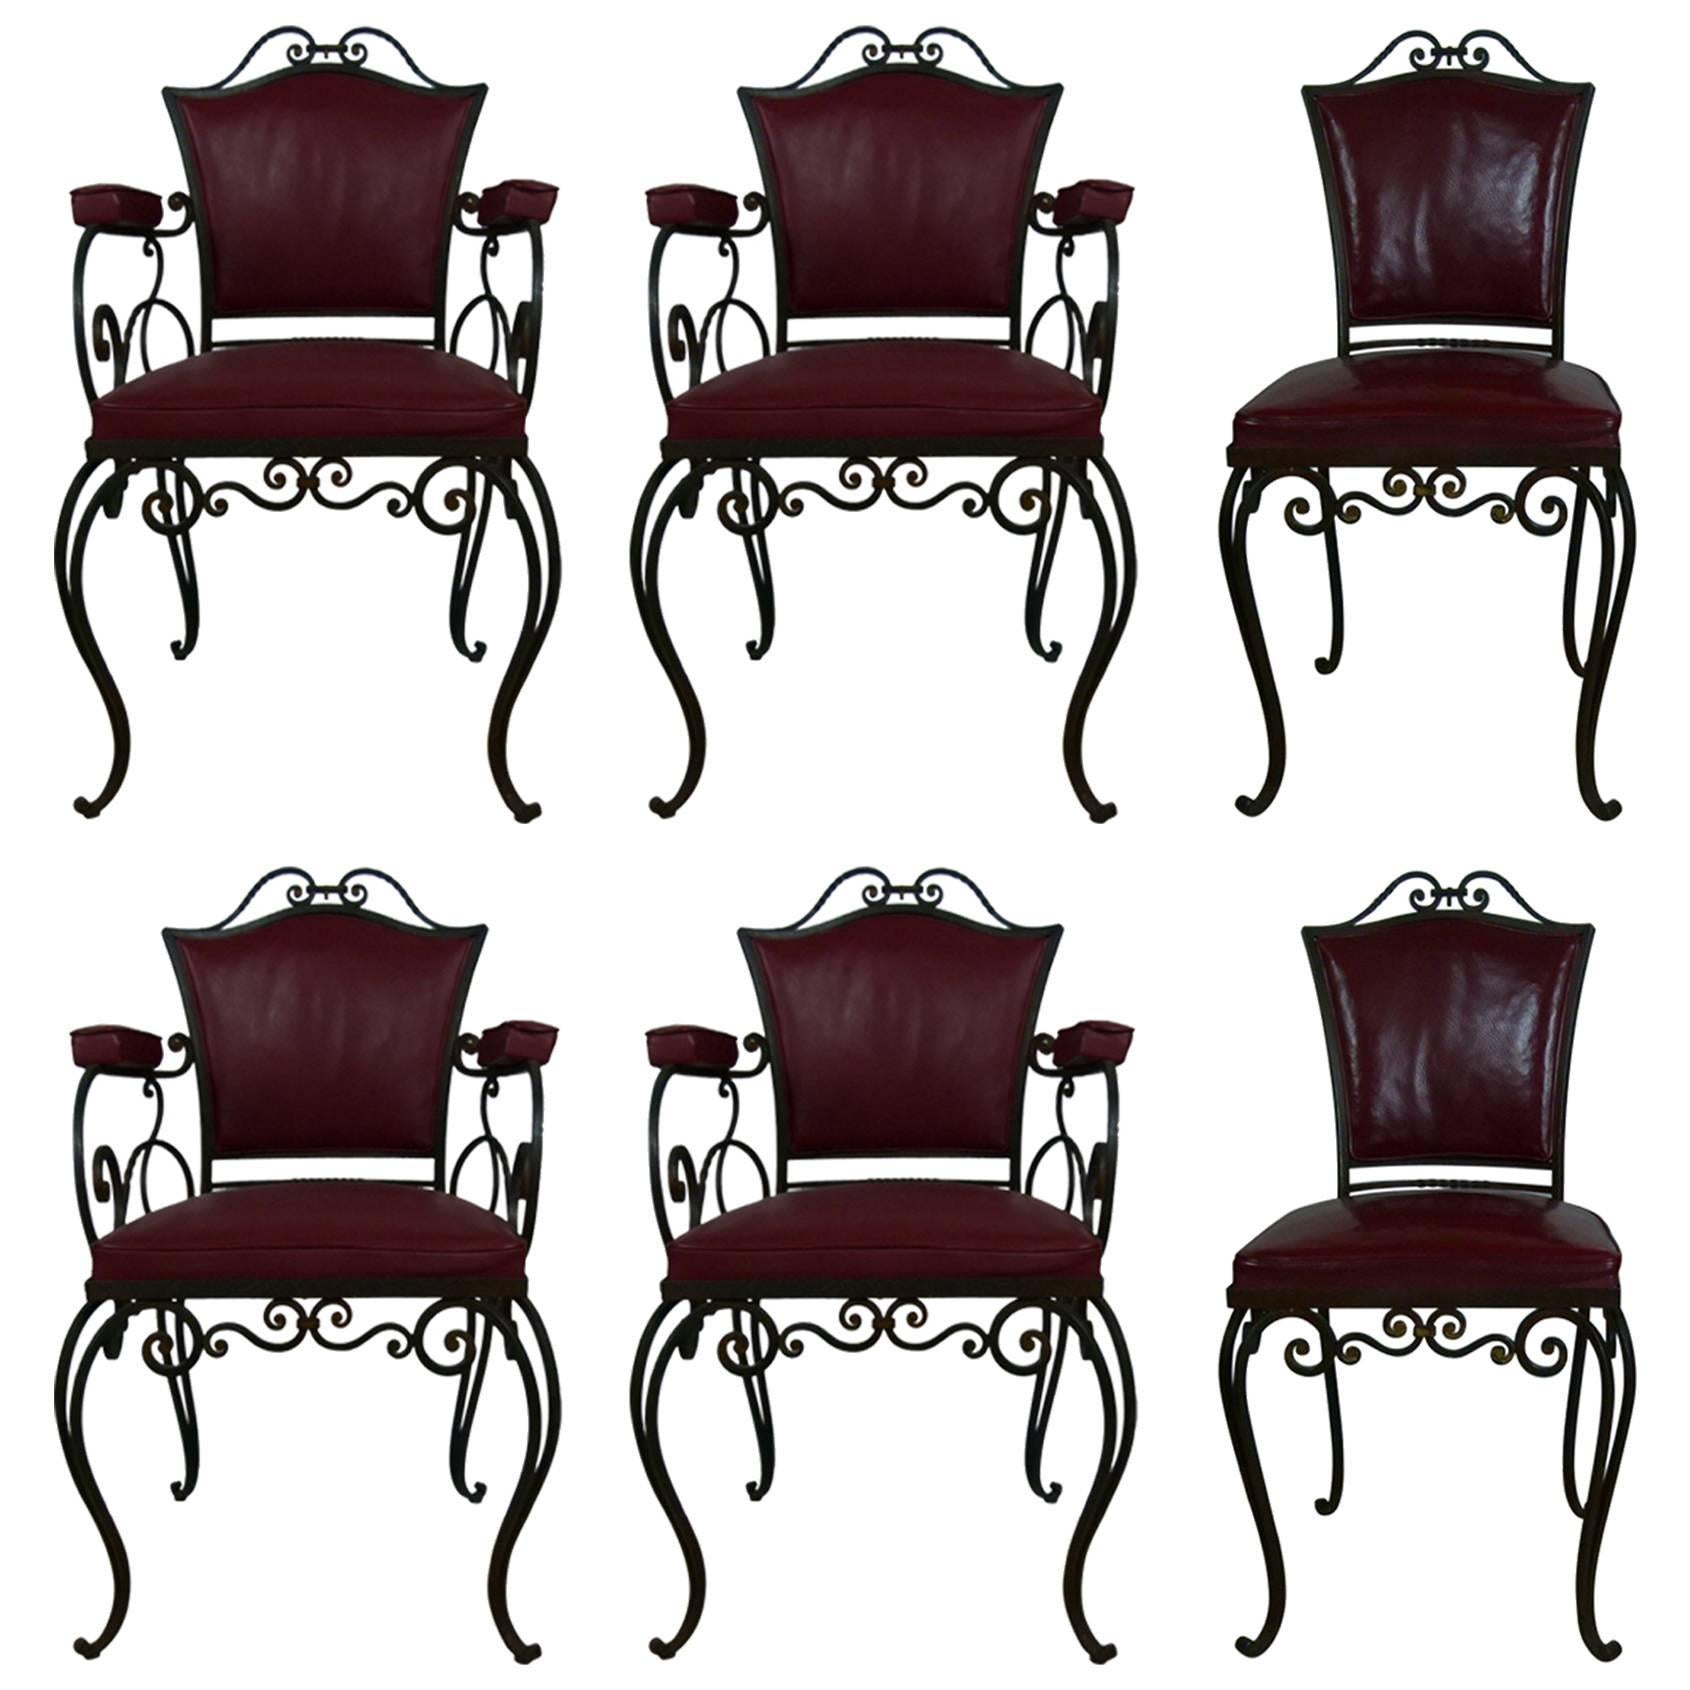 Series of Four Armchairs and Two Wrought Iron Chairs by JC Moreaux